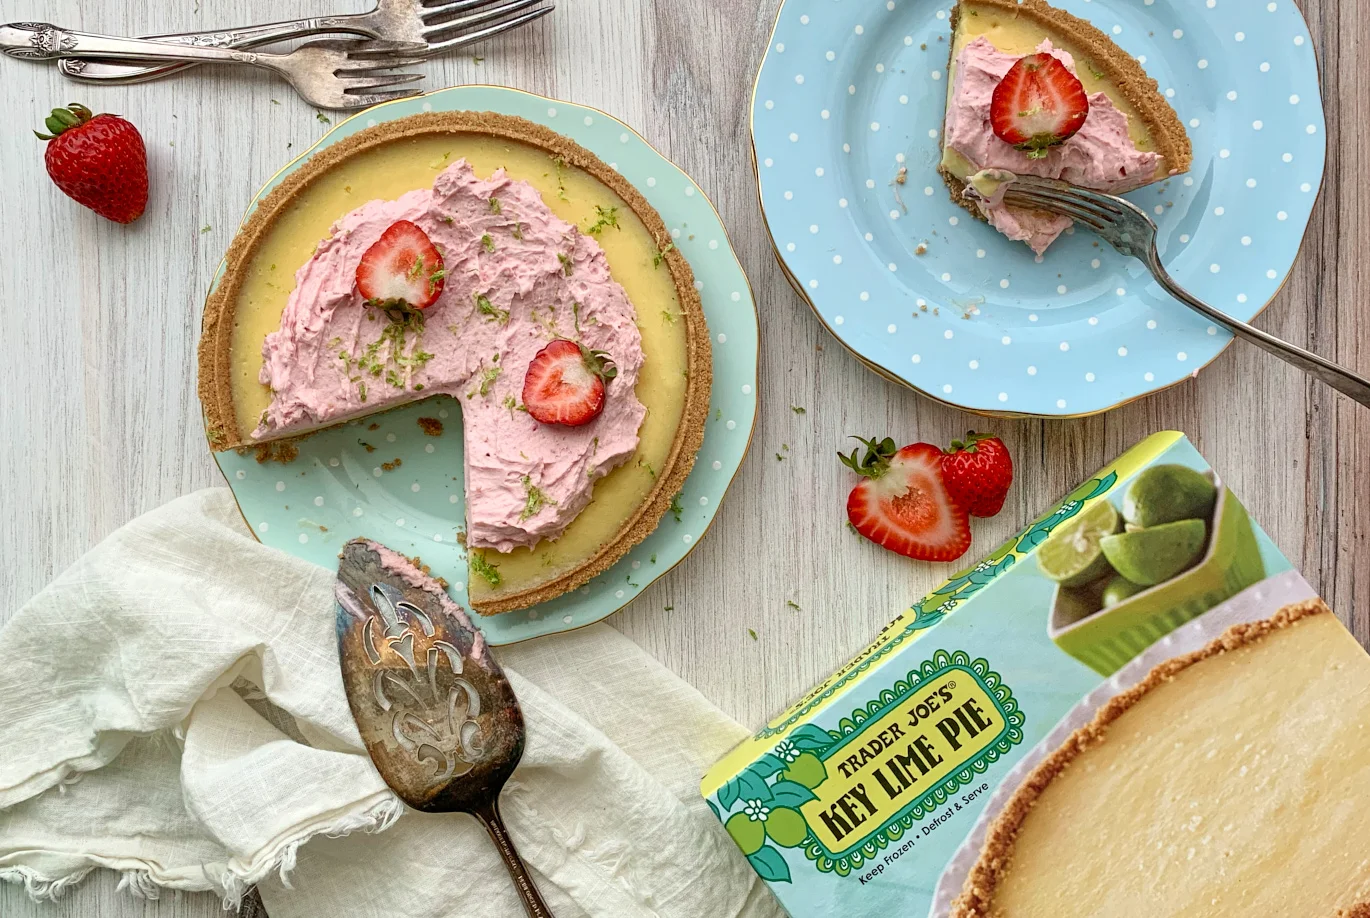 Trader Joe's Key Lime Pie with Strawberry Whipped Cream